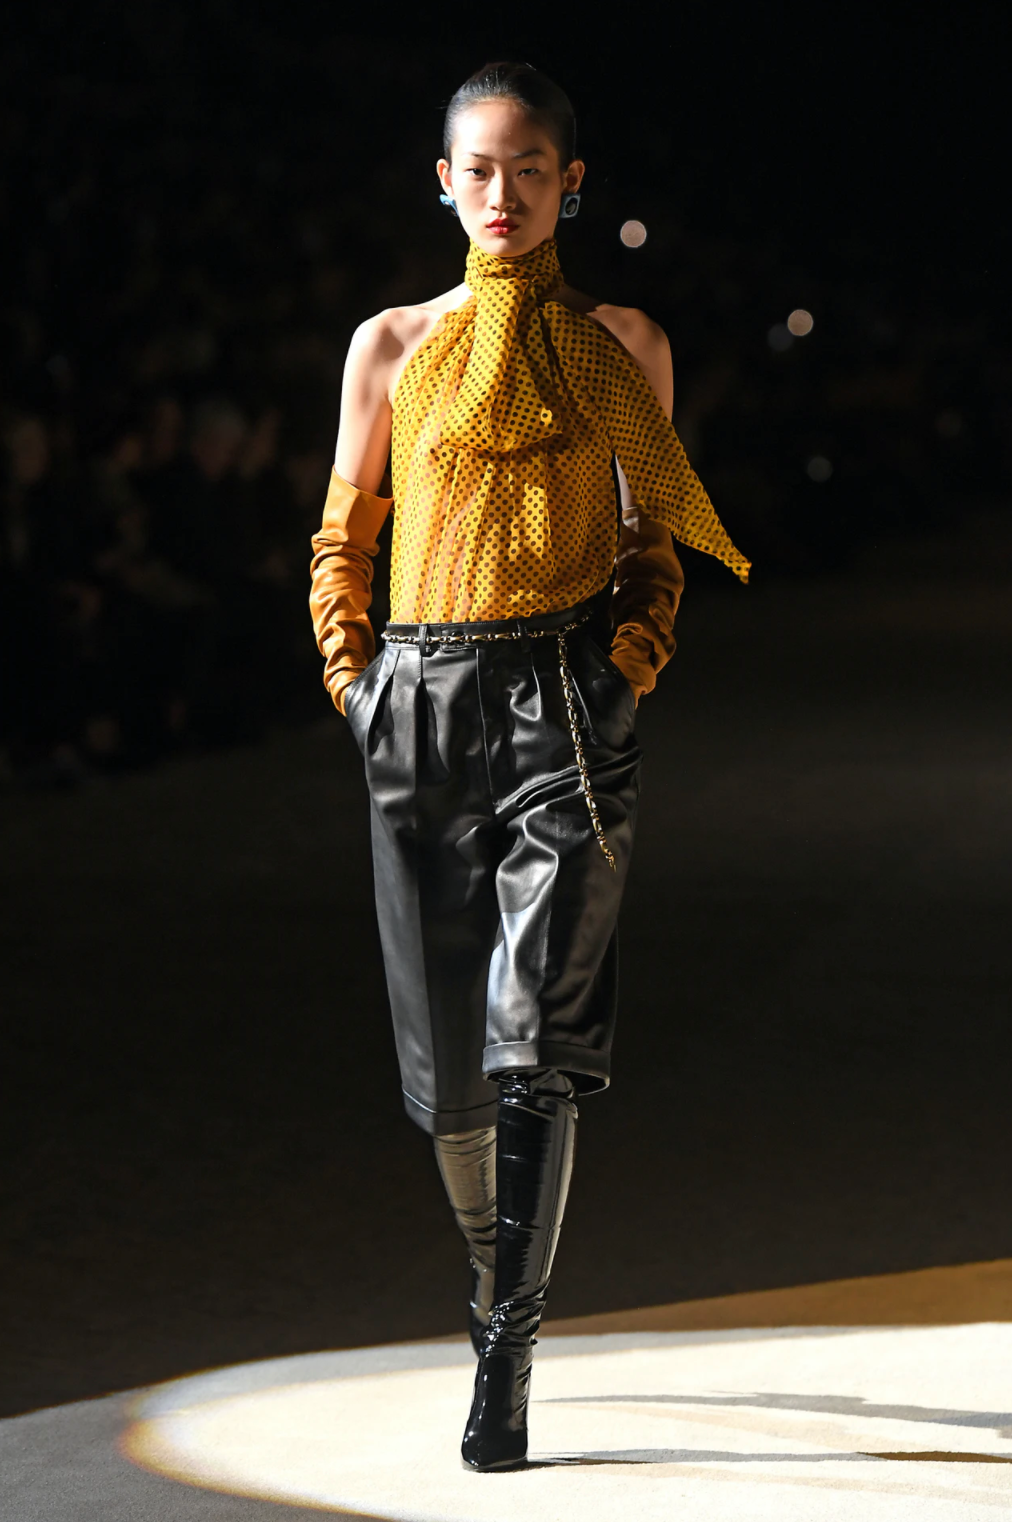  versace_yellow_polka_dot_top,leather_trousers_versace_fw_2020,autumn_versace_coat,accouter_group_of_companies,my_home_trend,interior_designer_middle_east,luxury_design,luxury_living,award_winning_interior_design,luxury_interiors_international,saint_